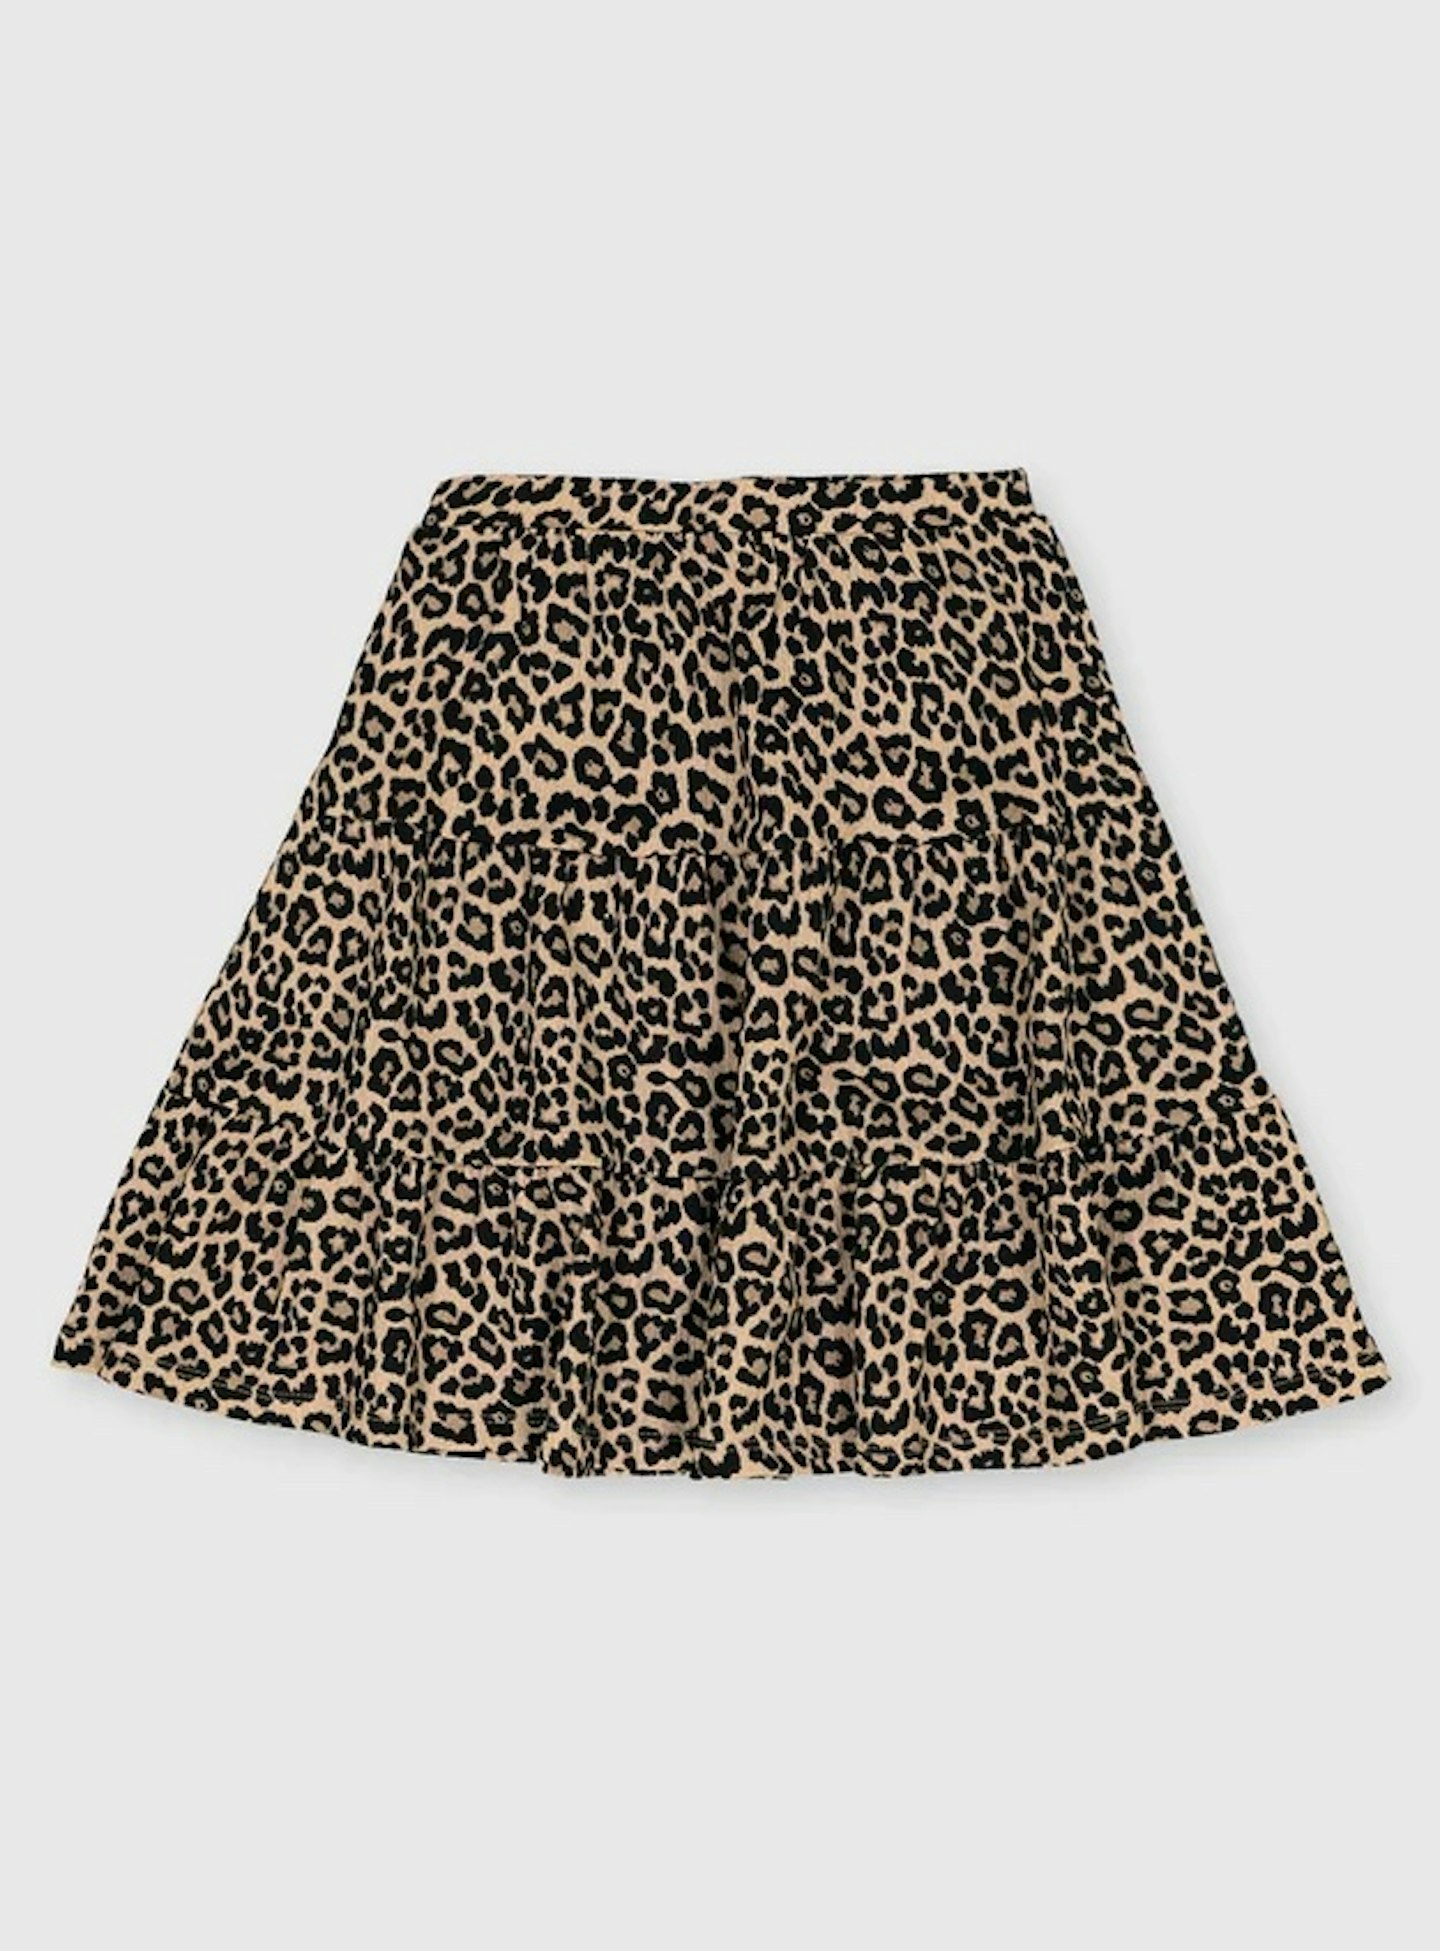 Leopard Print Tiered Skirt (3-14 Years), From £10.00